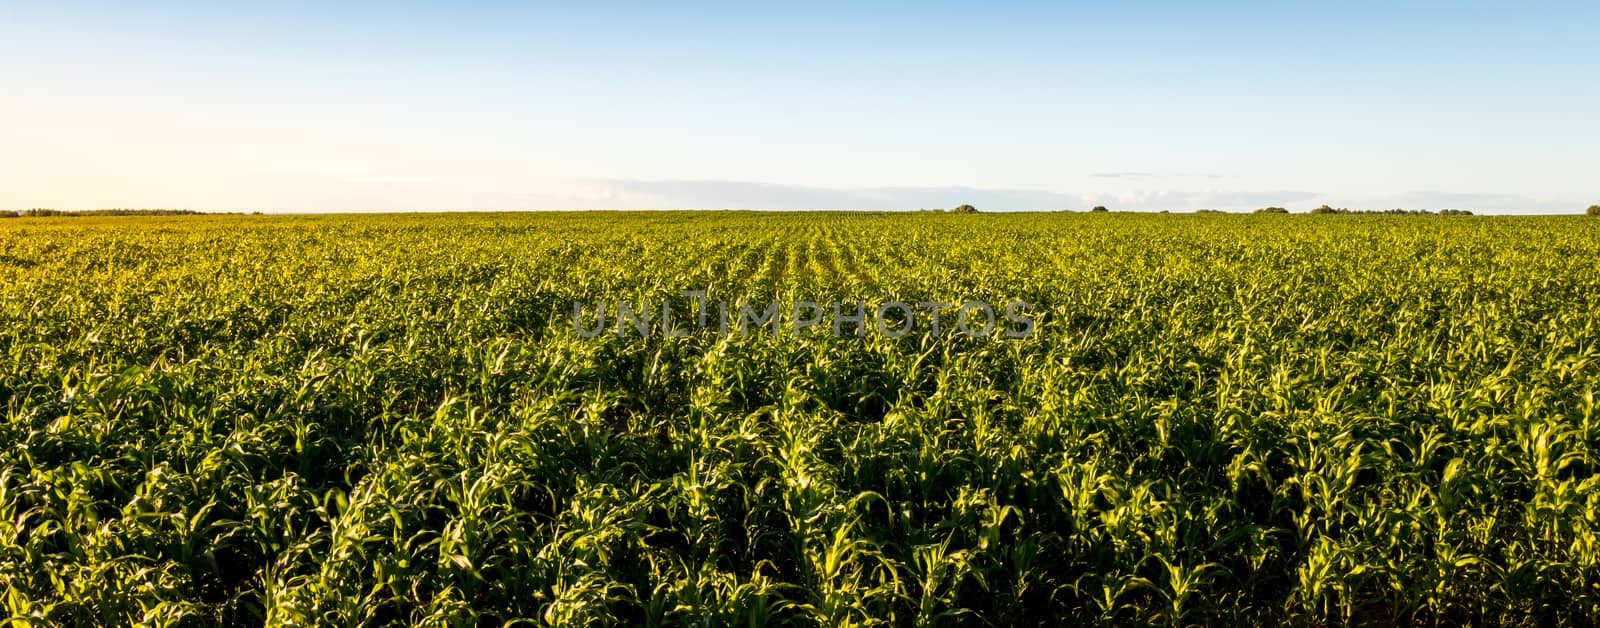 Agricultural field with young green corn on a clear sunny evening with clear blue skies. Panorama.